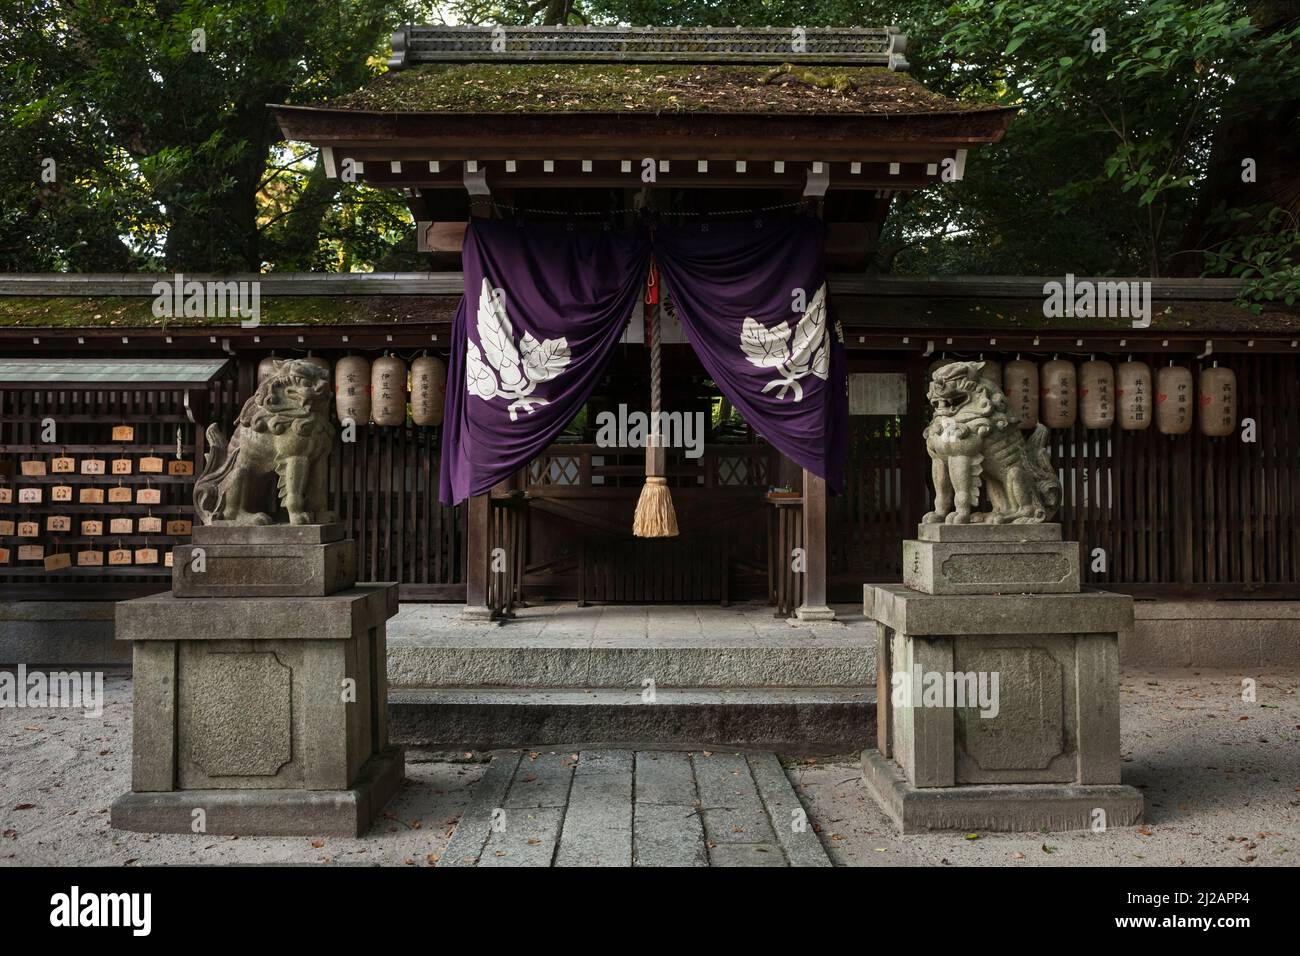 Horizontal view of the entrance gate to the Shinto Shrine of the Kyoto Imperial Palace Park in Central Kyoto, Japan Stock Photo